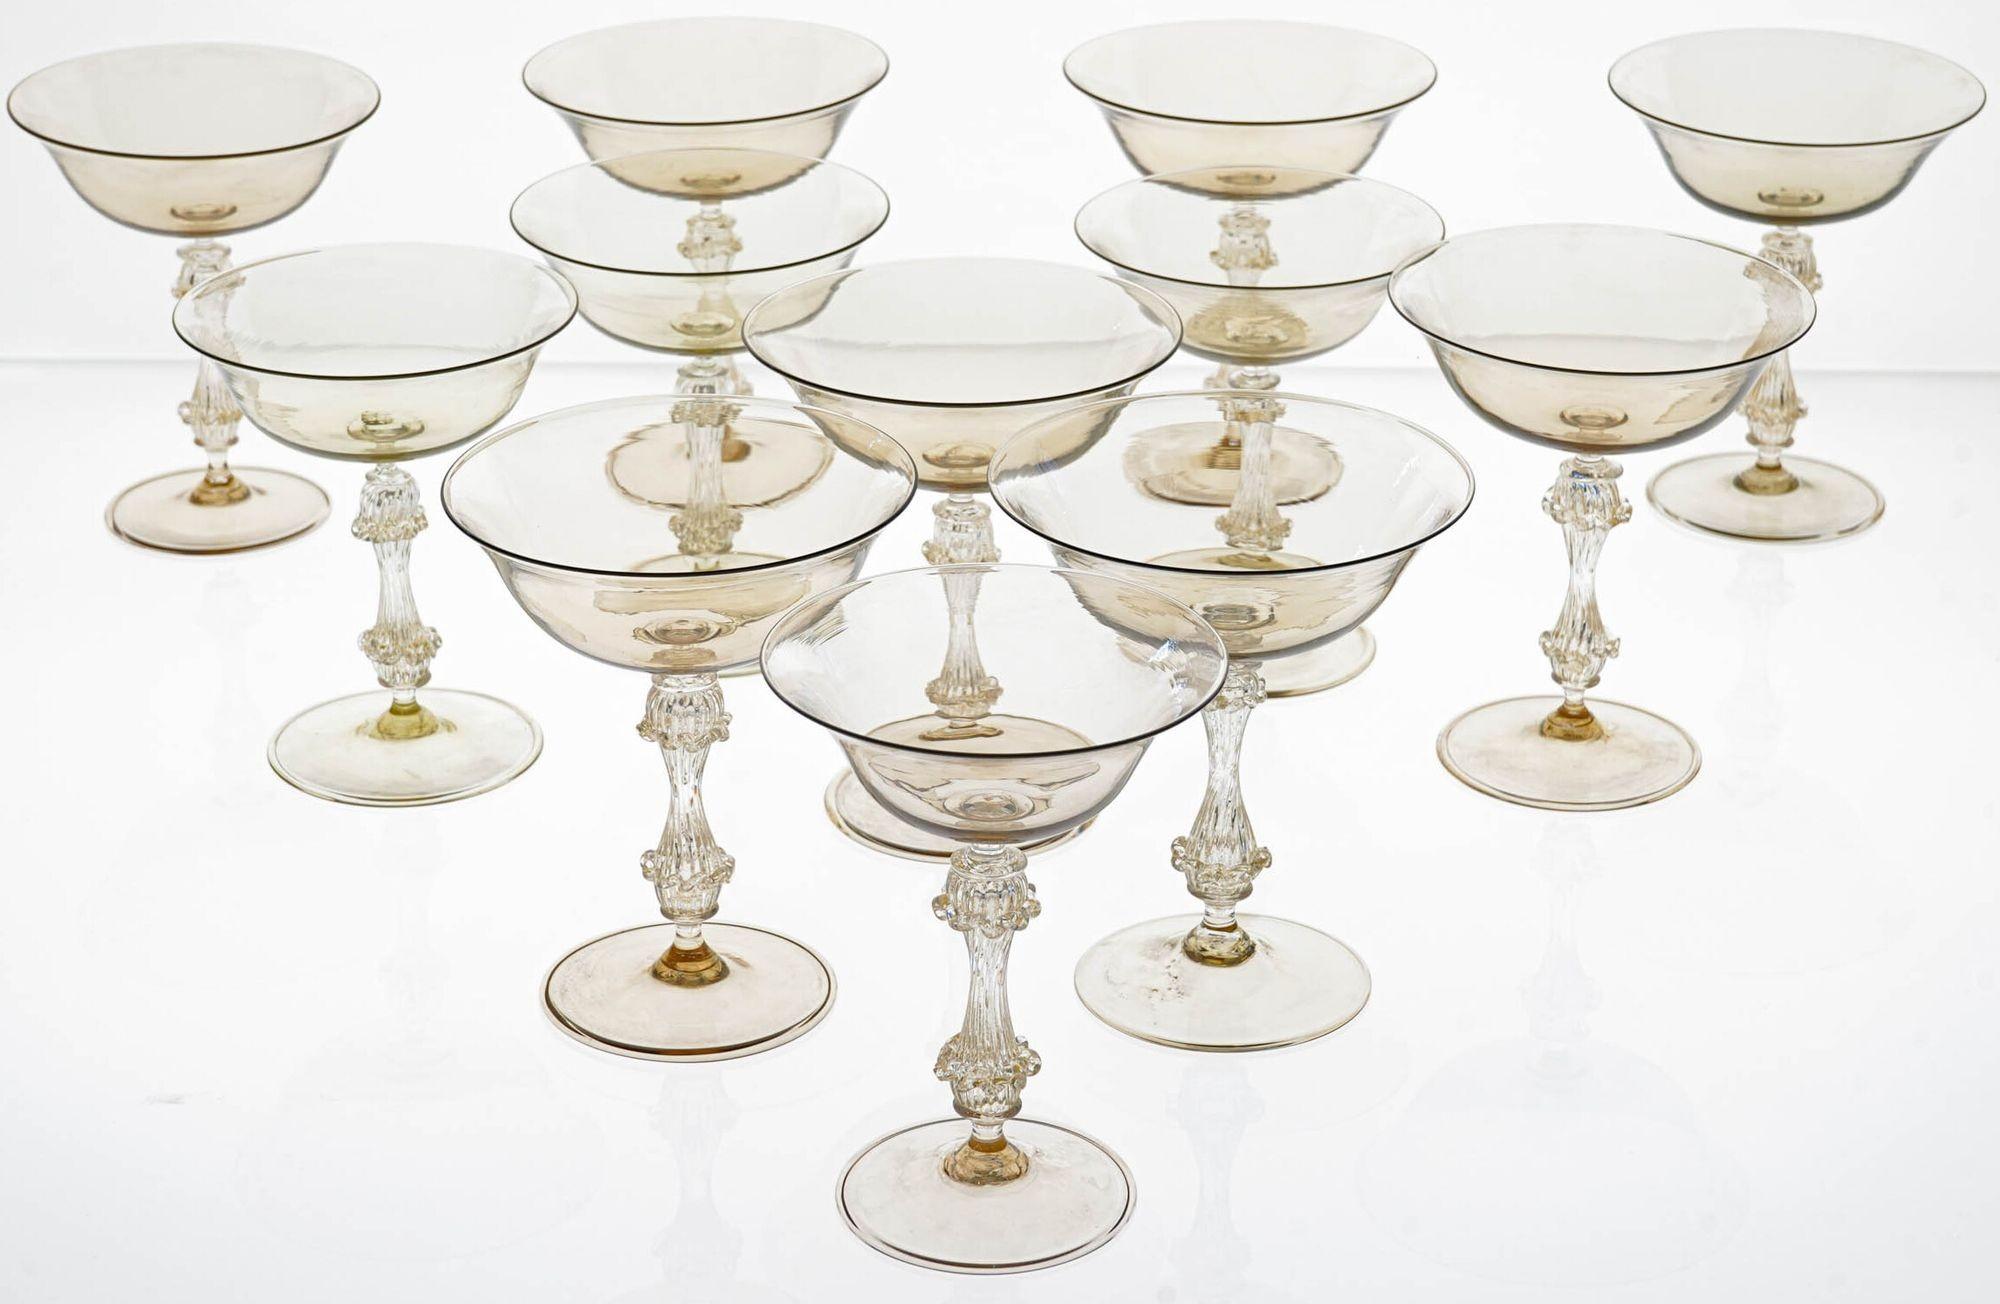 This exceptional set of 12 vintage champagne glasses is a rare and unique find.

Handmade in Murano, Italy by Cenedese, one of the most renowned glassmakers of the time, these glasses are a masterpiece of craftsmanship.

The glasses are made of